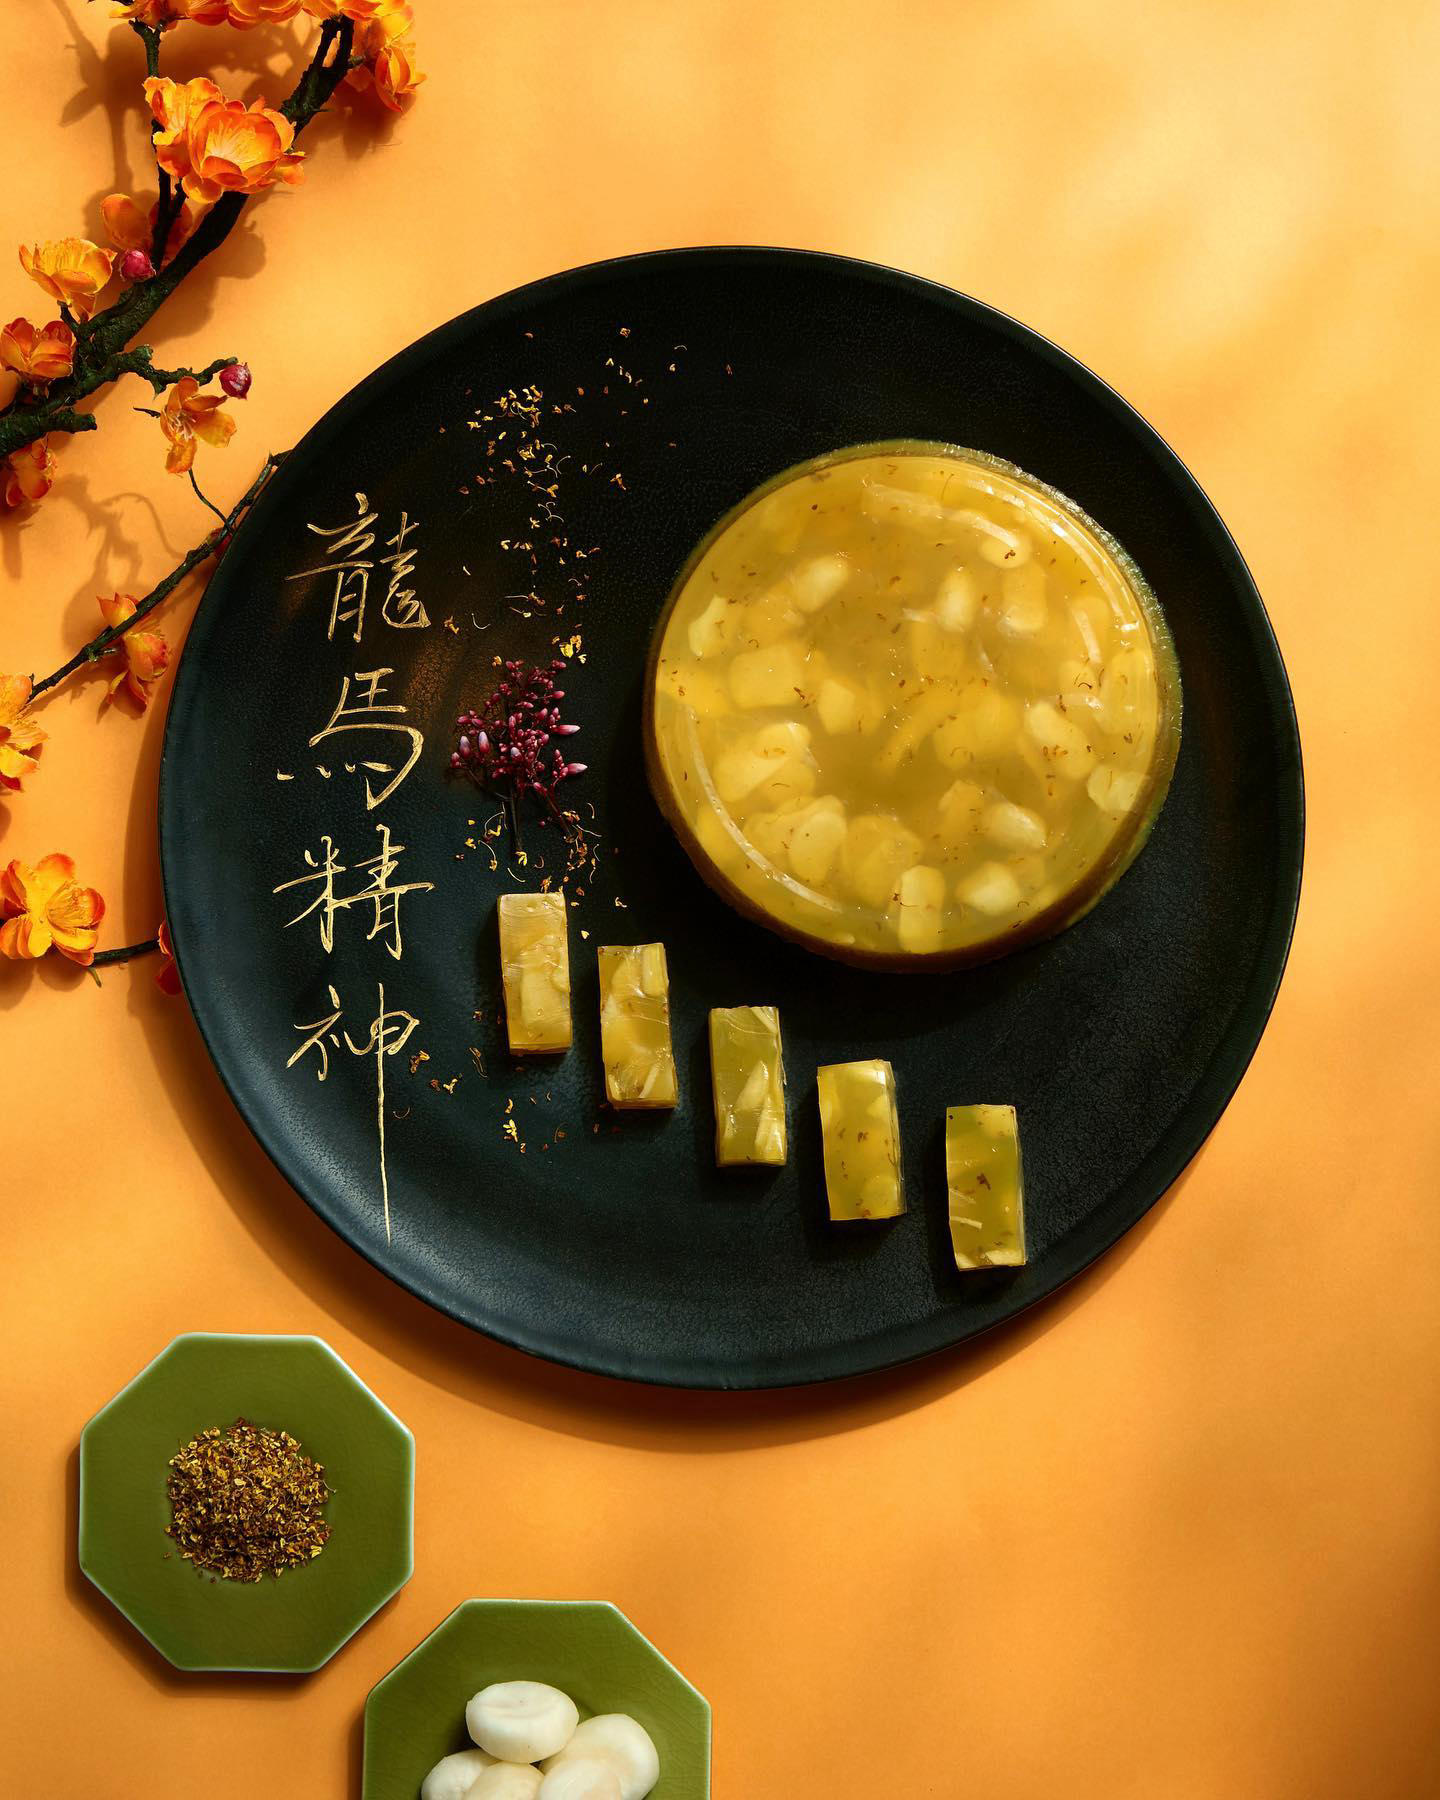 Debuting our latest Lunar New Year dessert this year is the traditional Water Chestnut Cake made wit